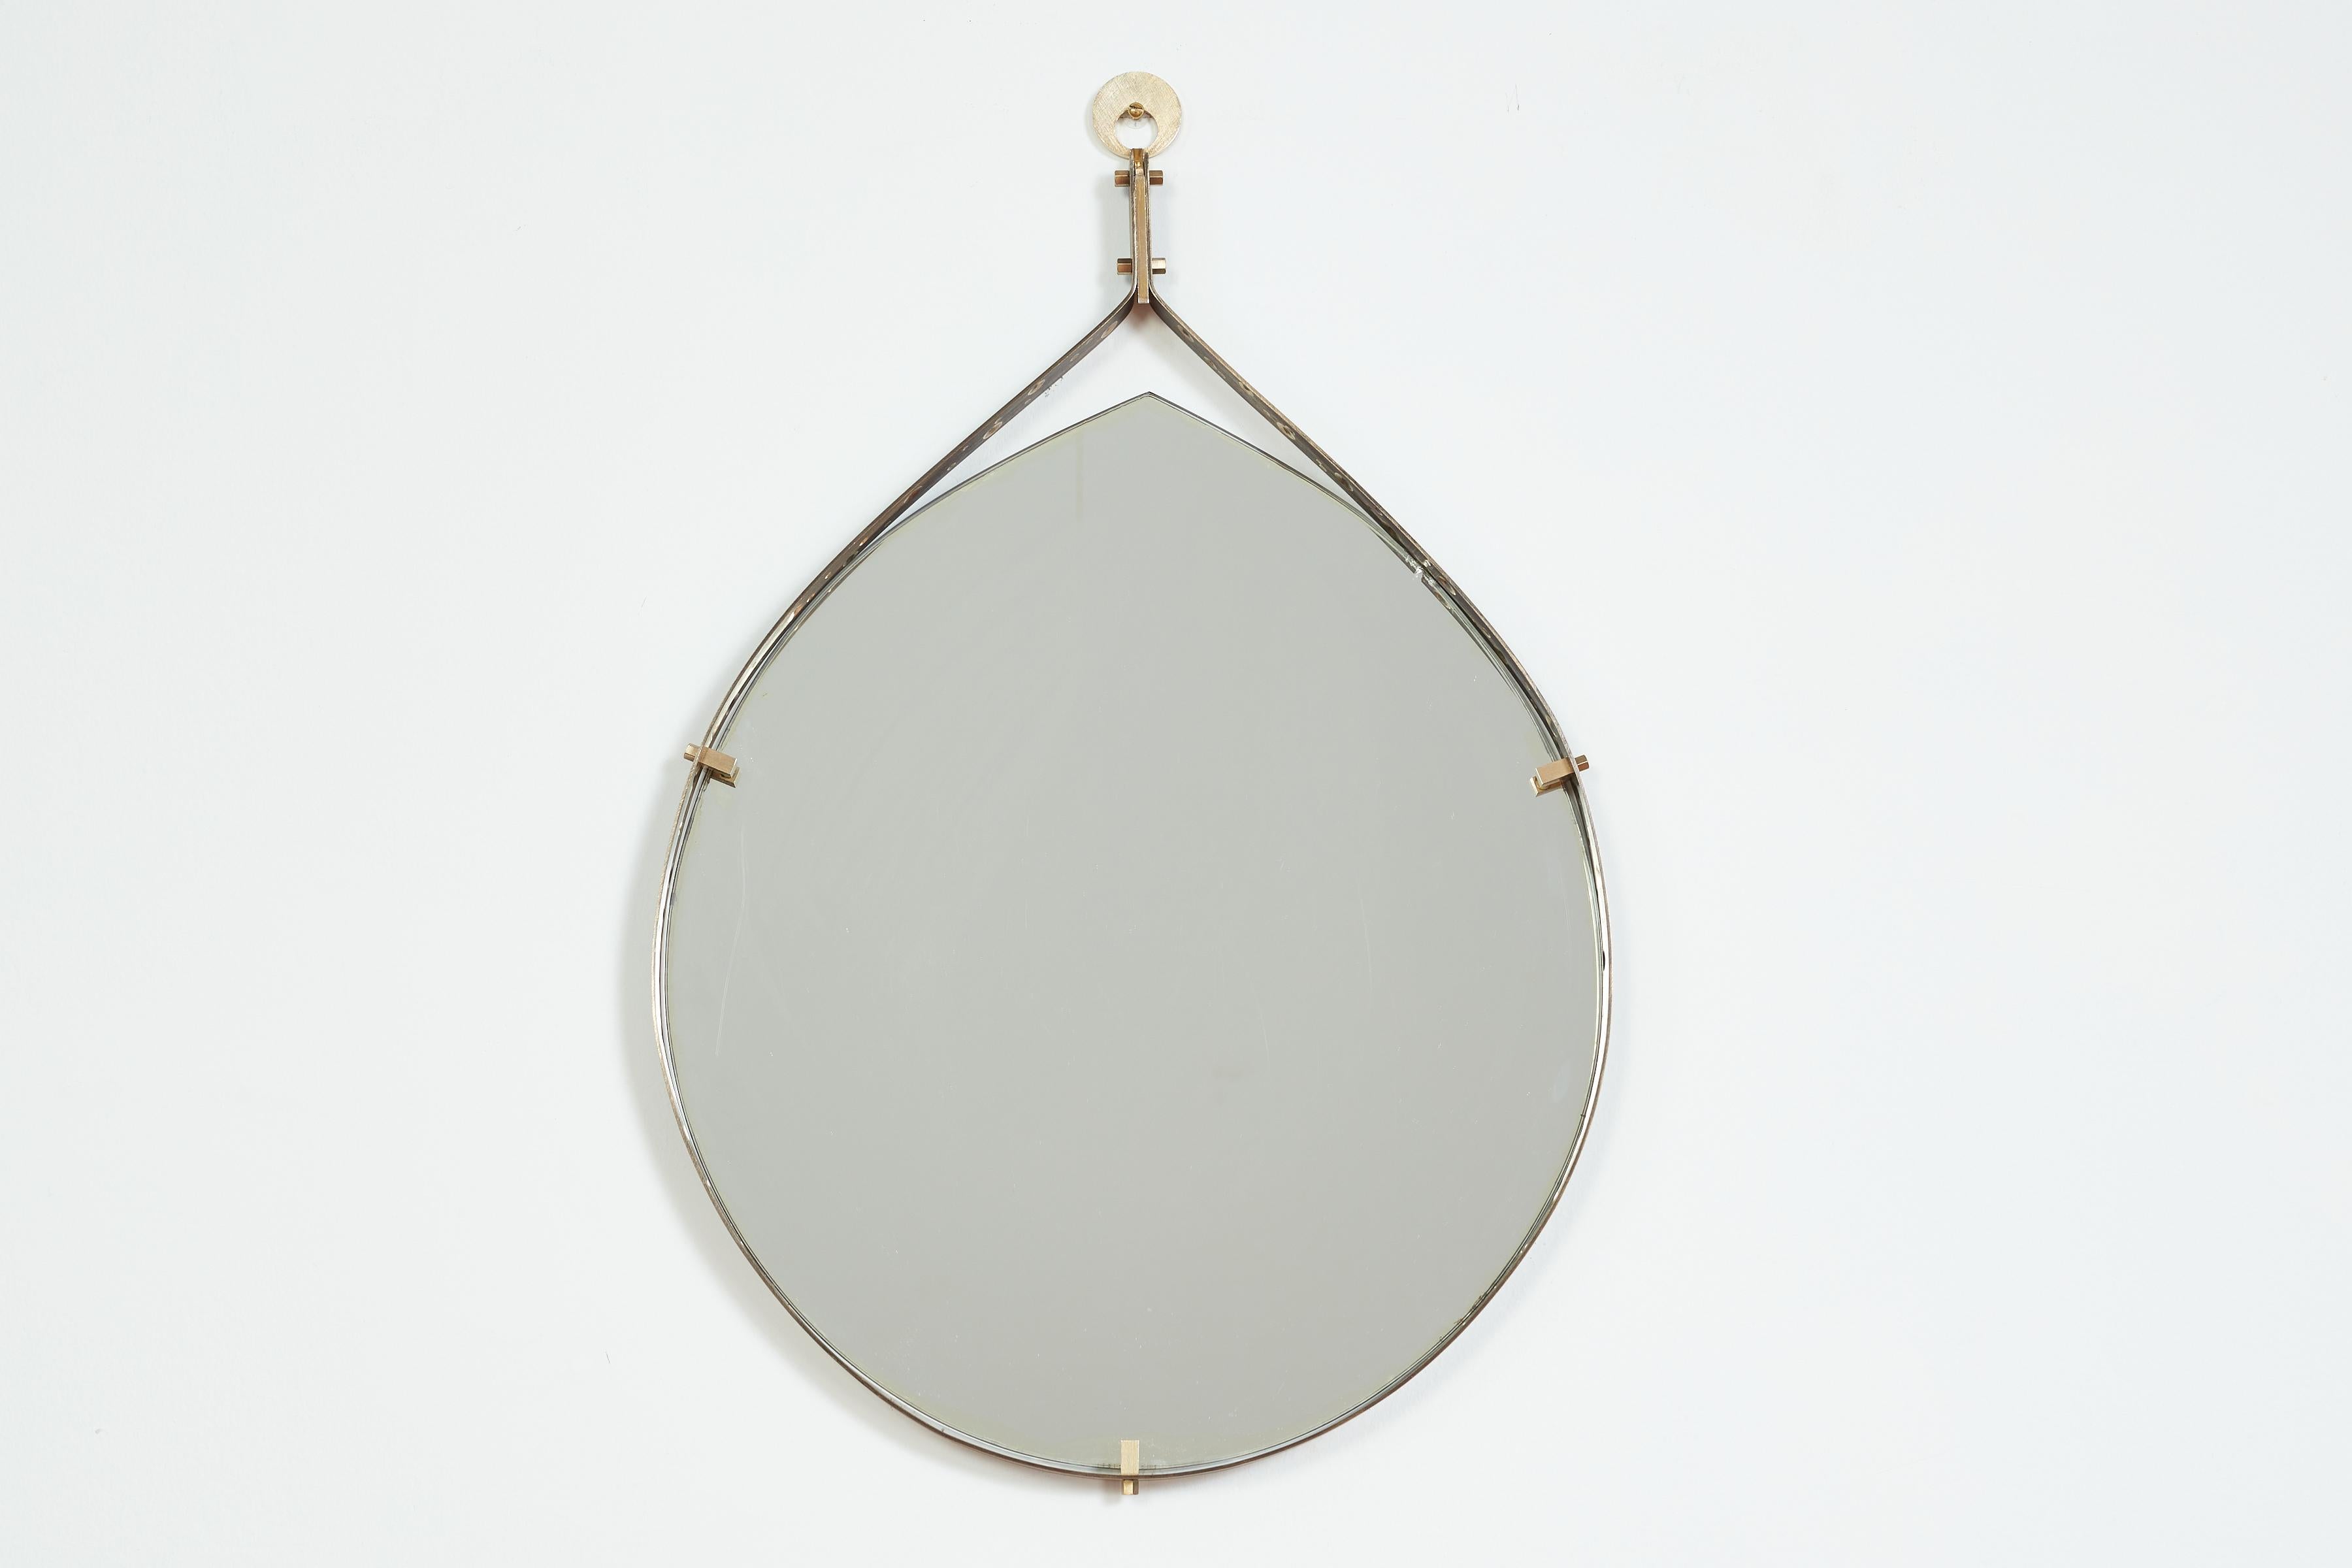 1950's Italian silvered iron and brass tear dropped shaped mirror with perforated brass detail within the edge.  
Designed by Ambrogio  & De Berti - Italy, 1950s